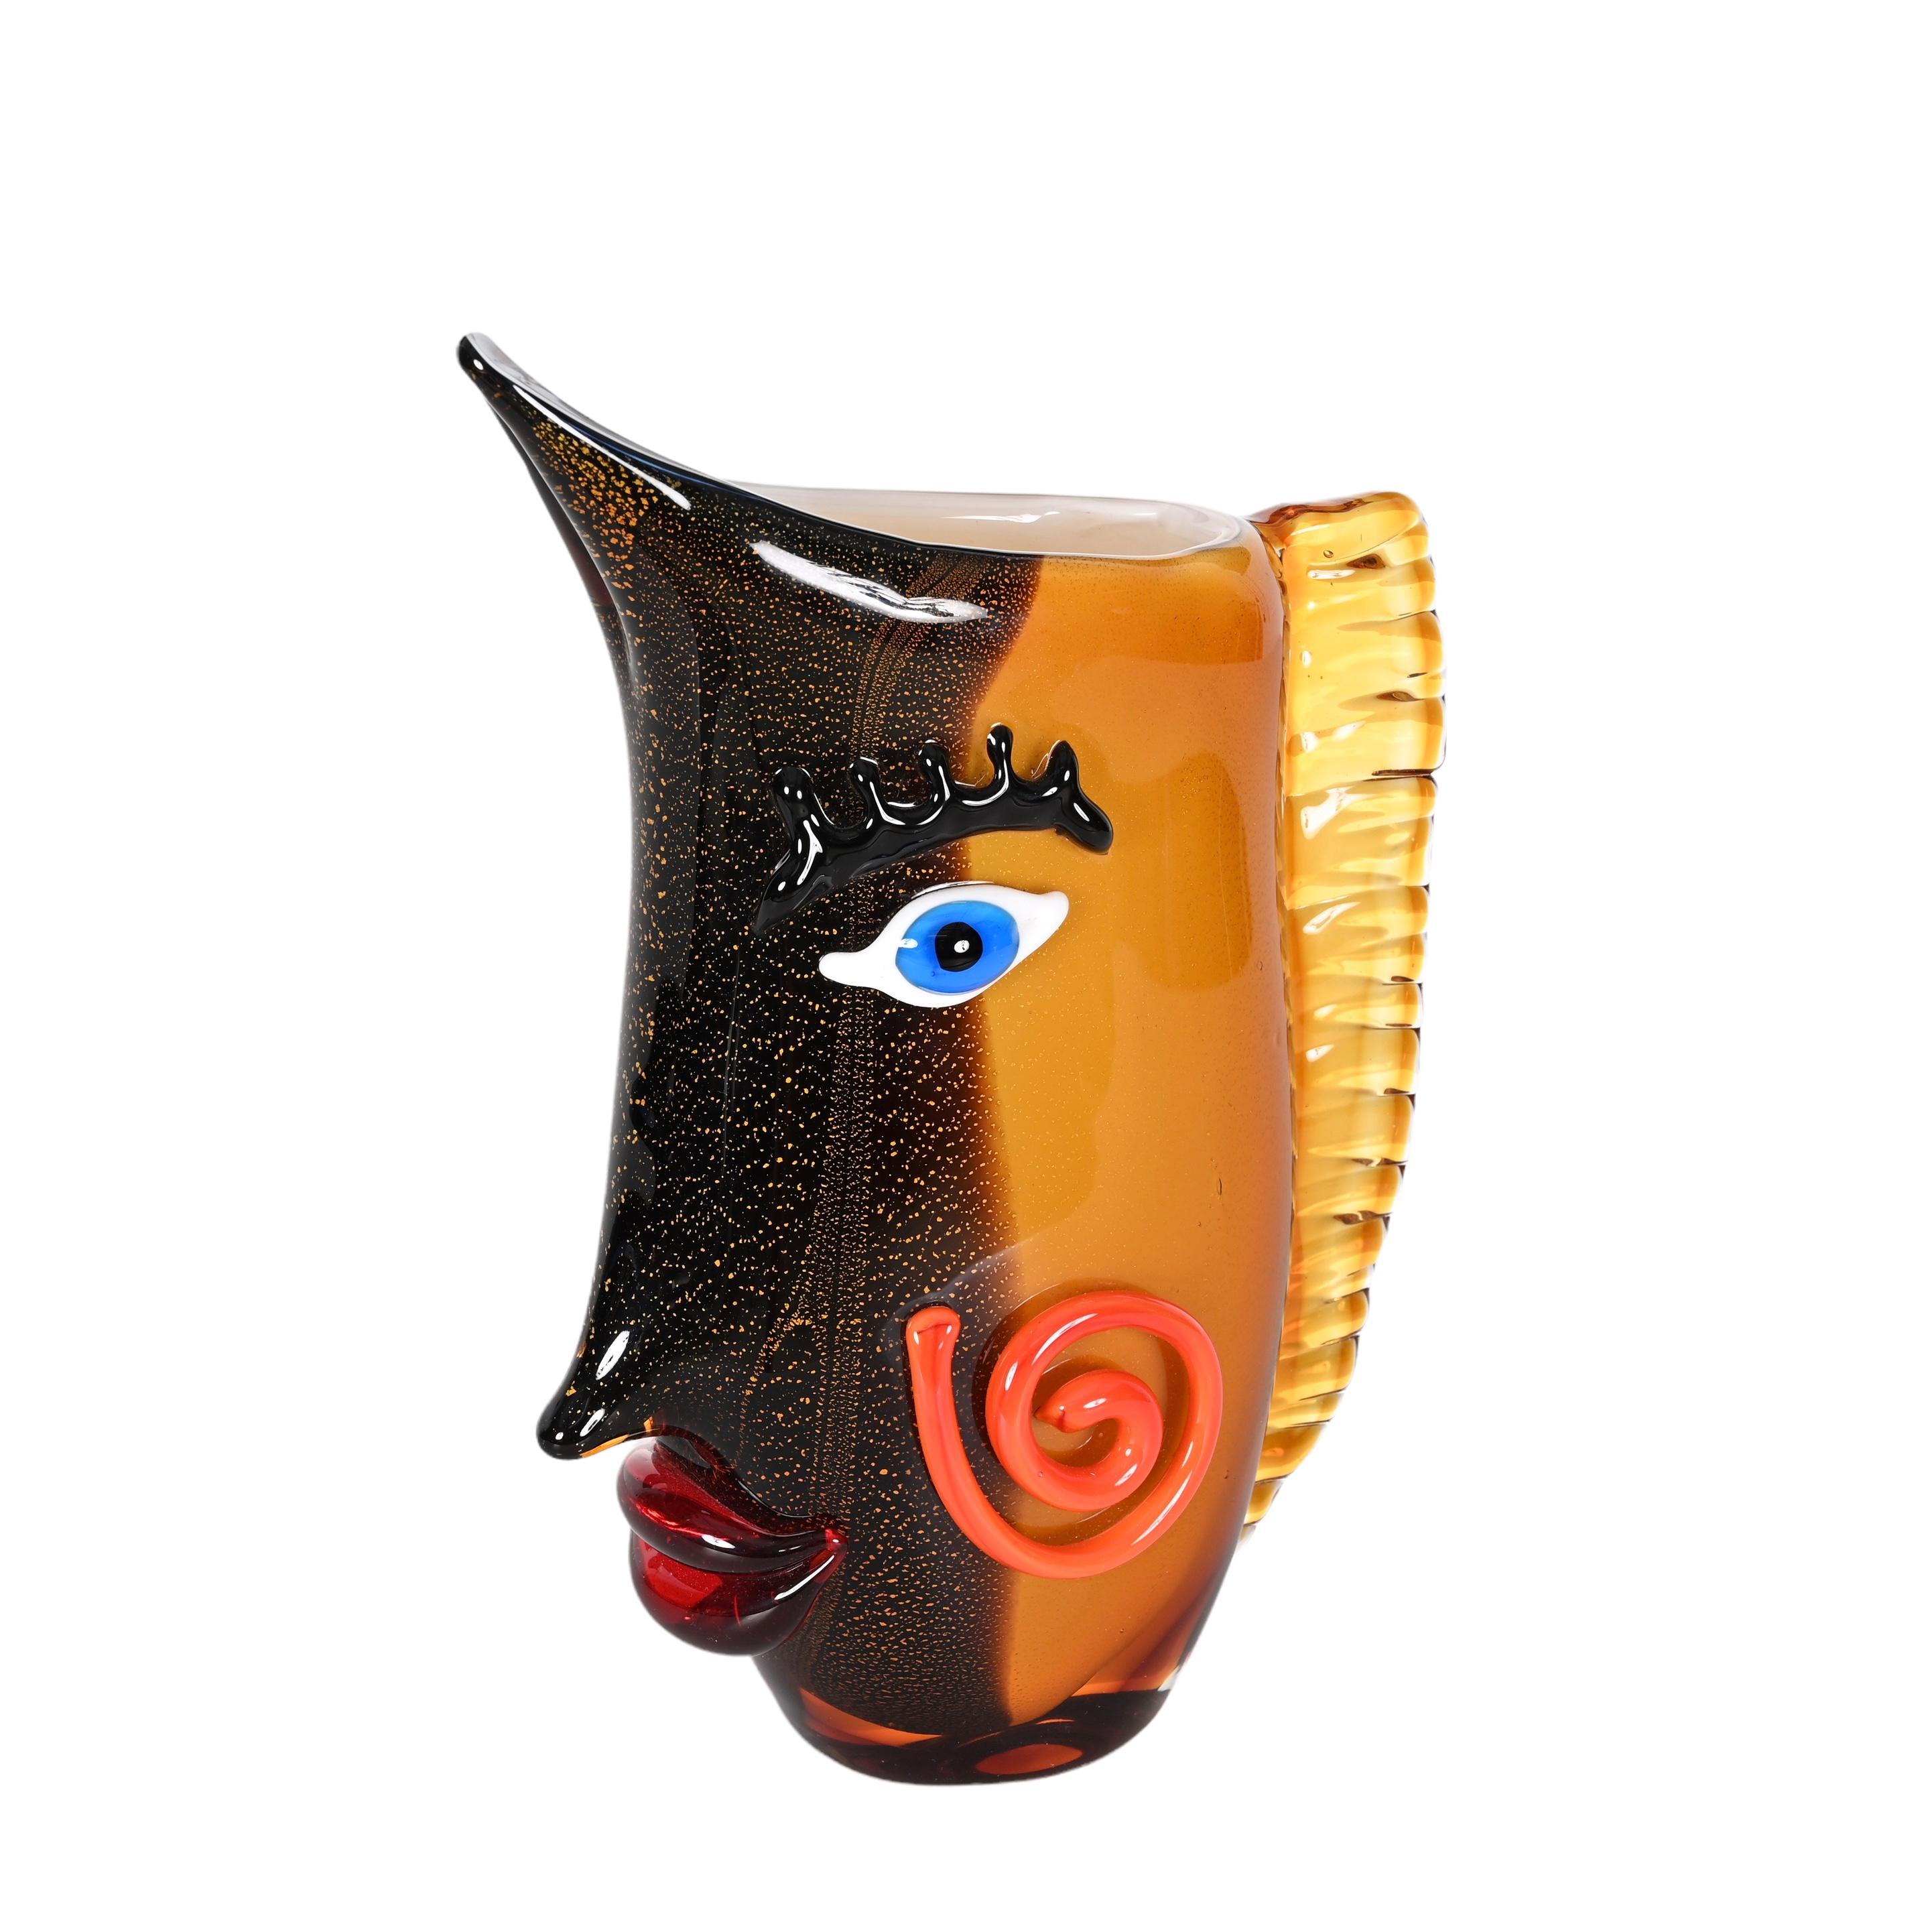 Mario Badioli after Picasso Black and Orange Sommerso Murano Glass Vase, 1980s For Sale 3